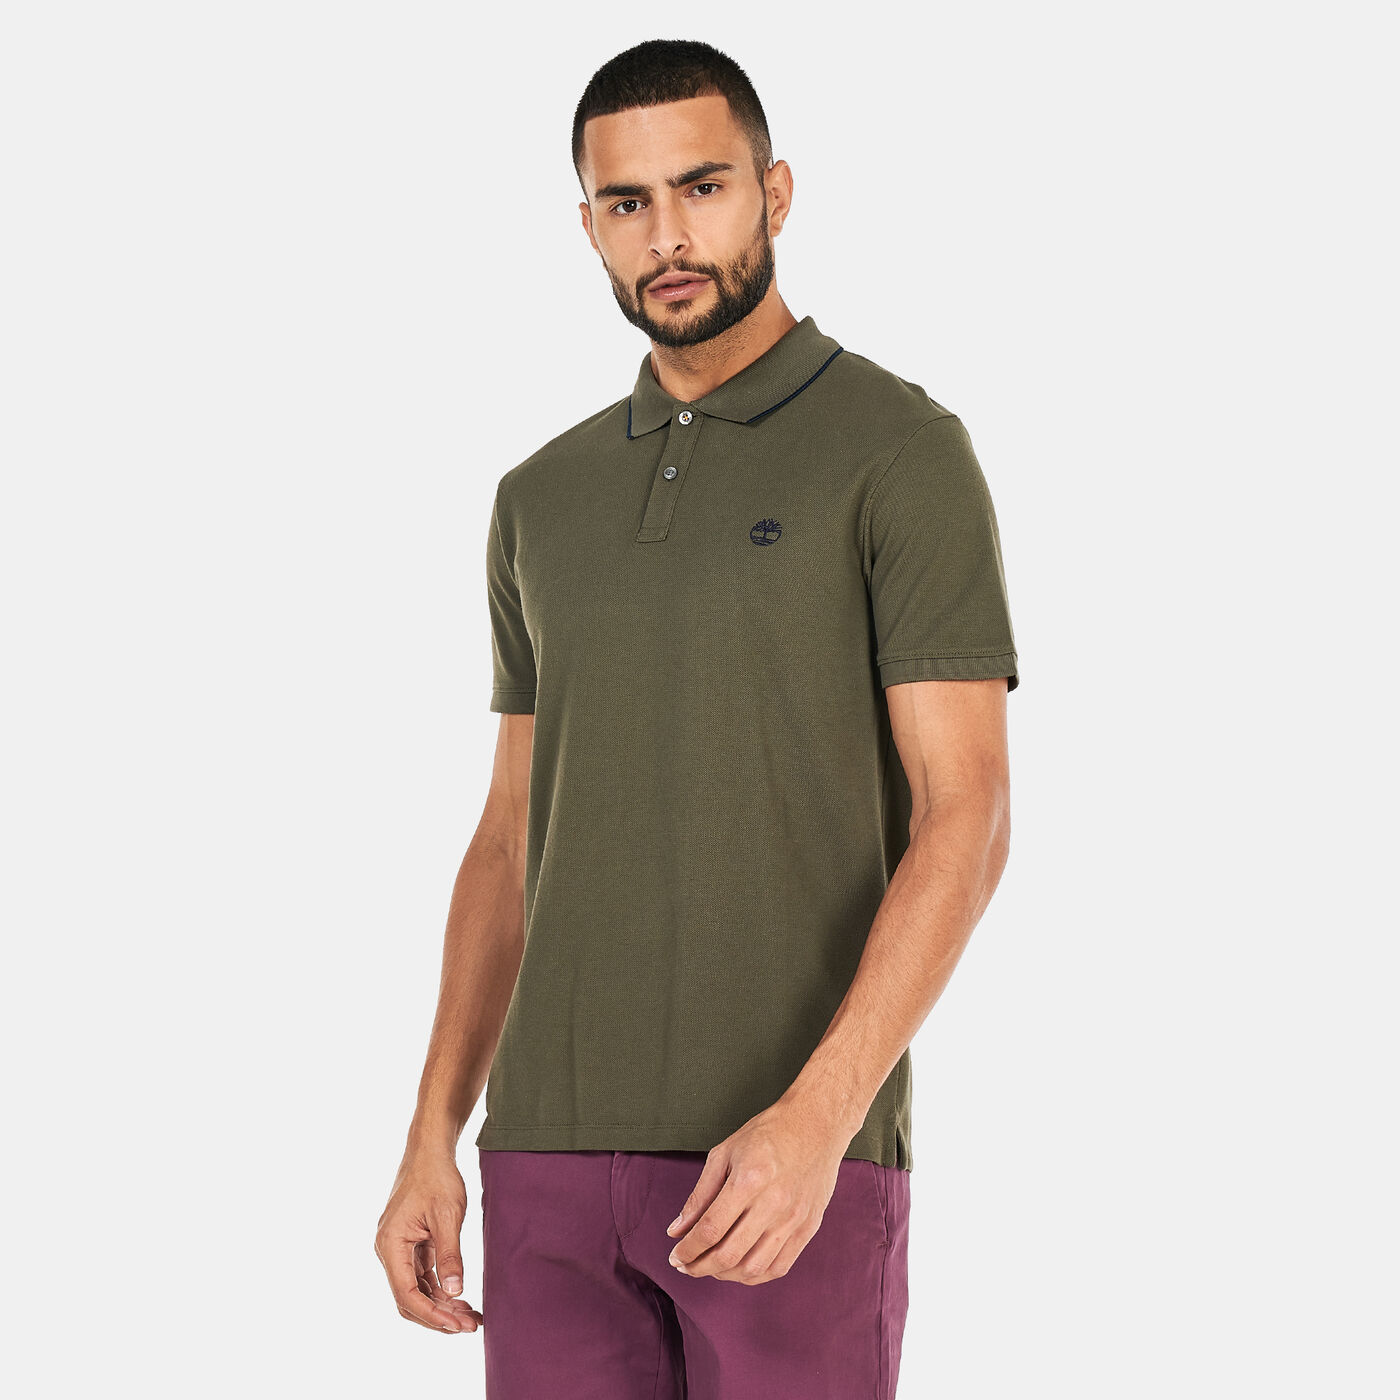 Men's Millers River Polo Shirt